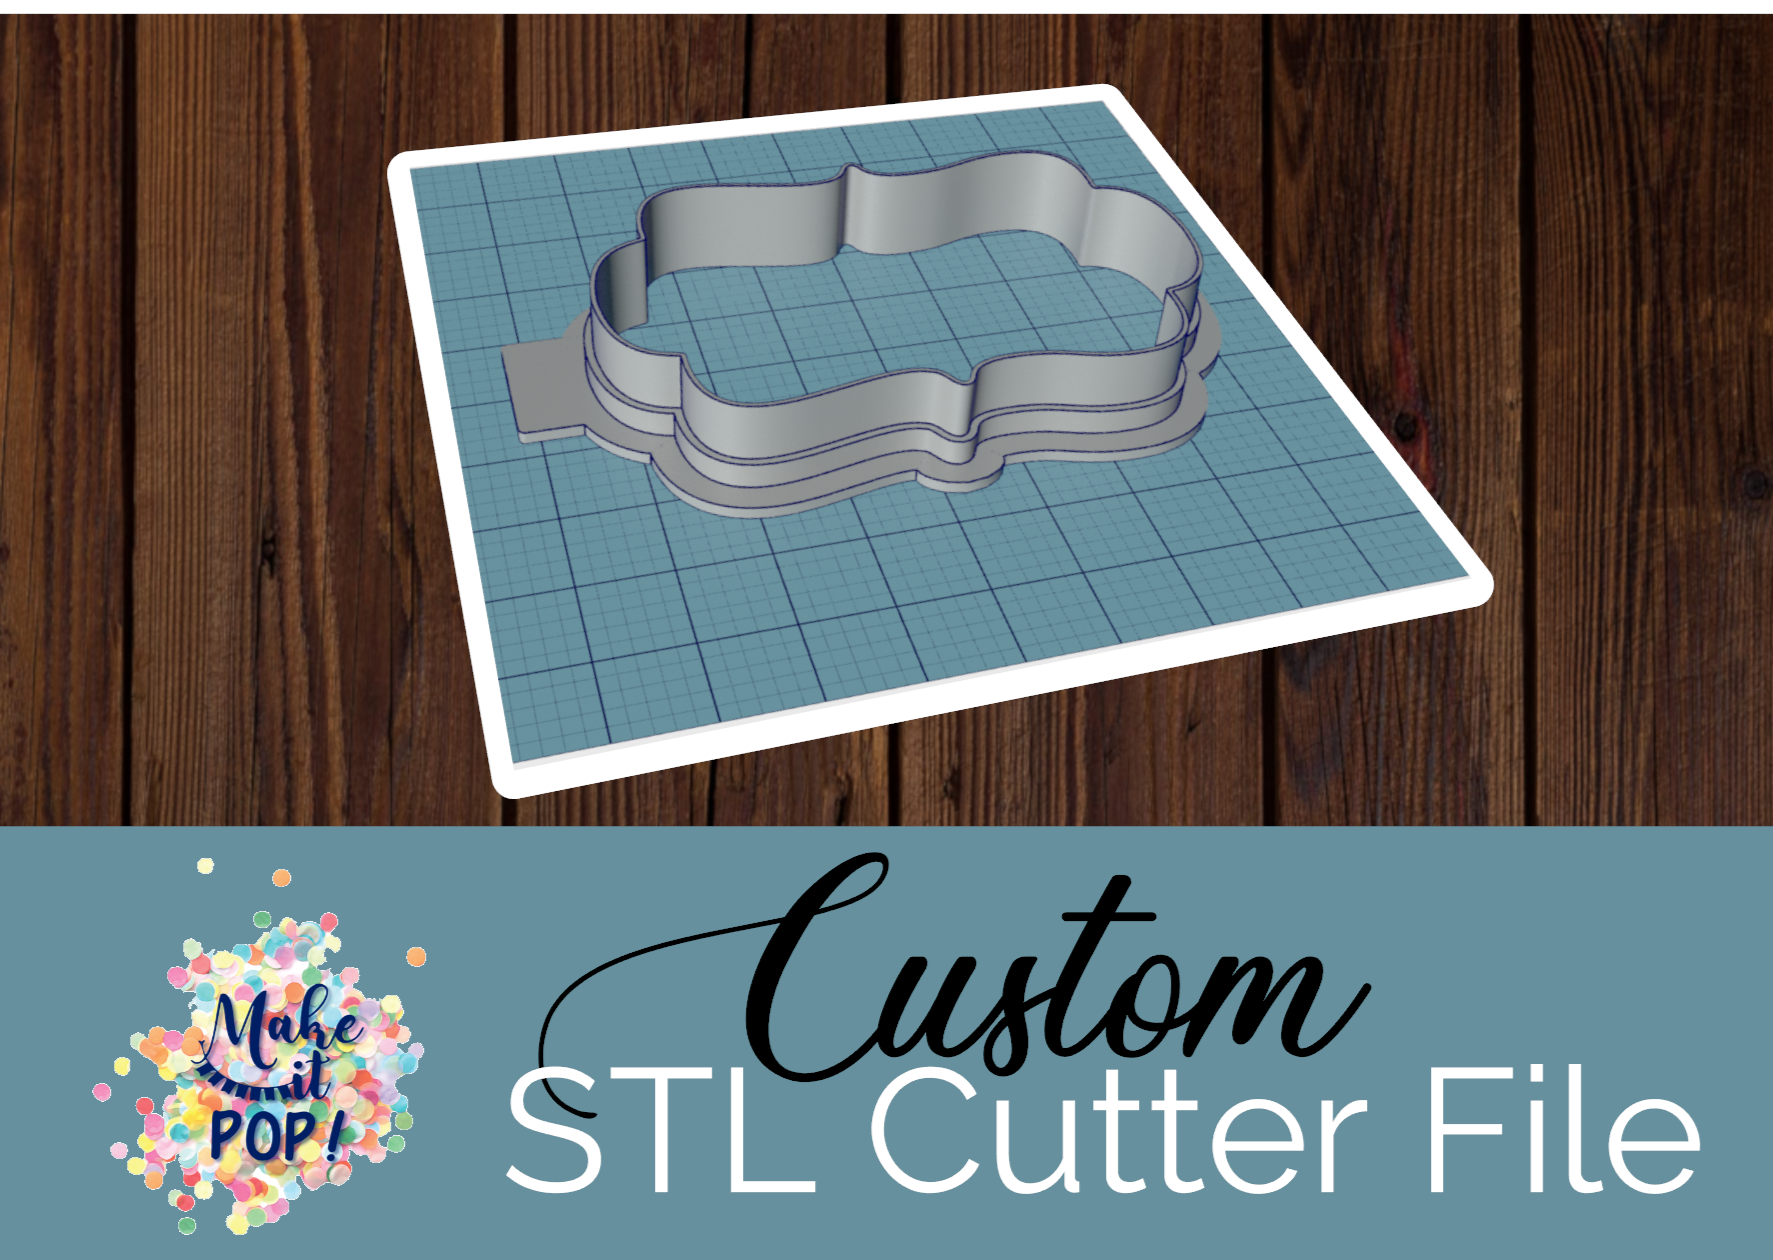 Jason Cookie Cutter STL File to download and Print 2-Pc File Stamp and Cutter